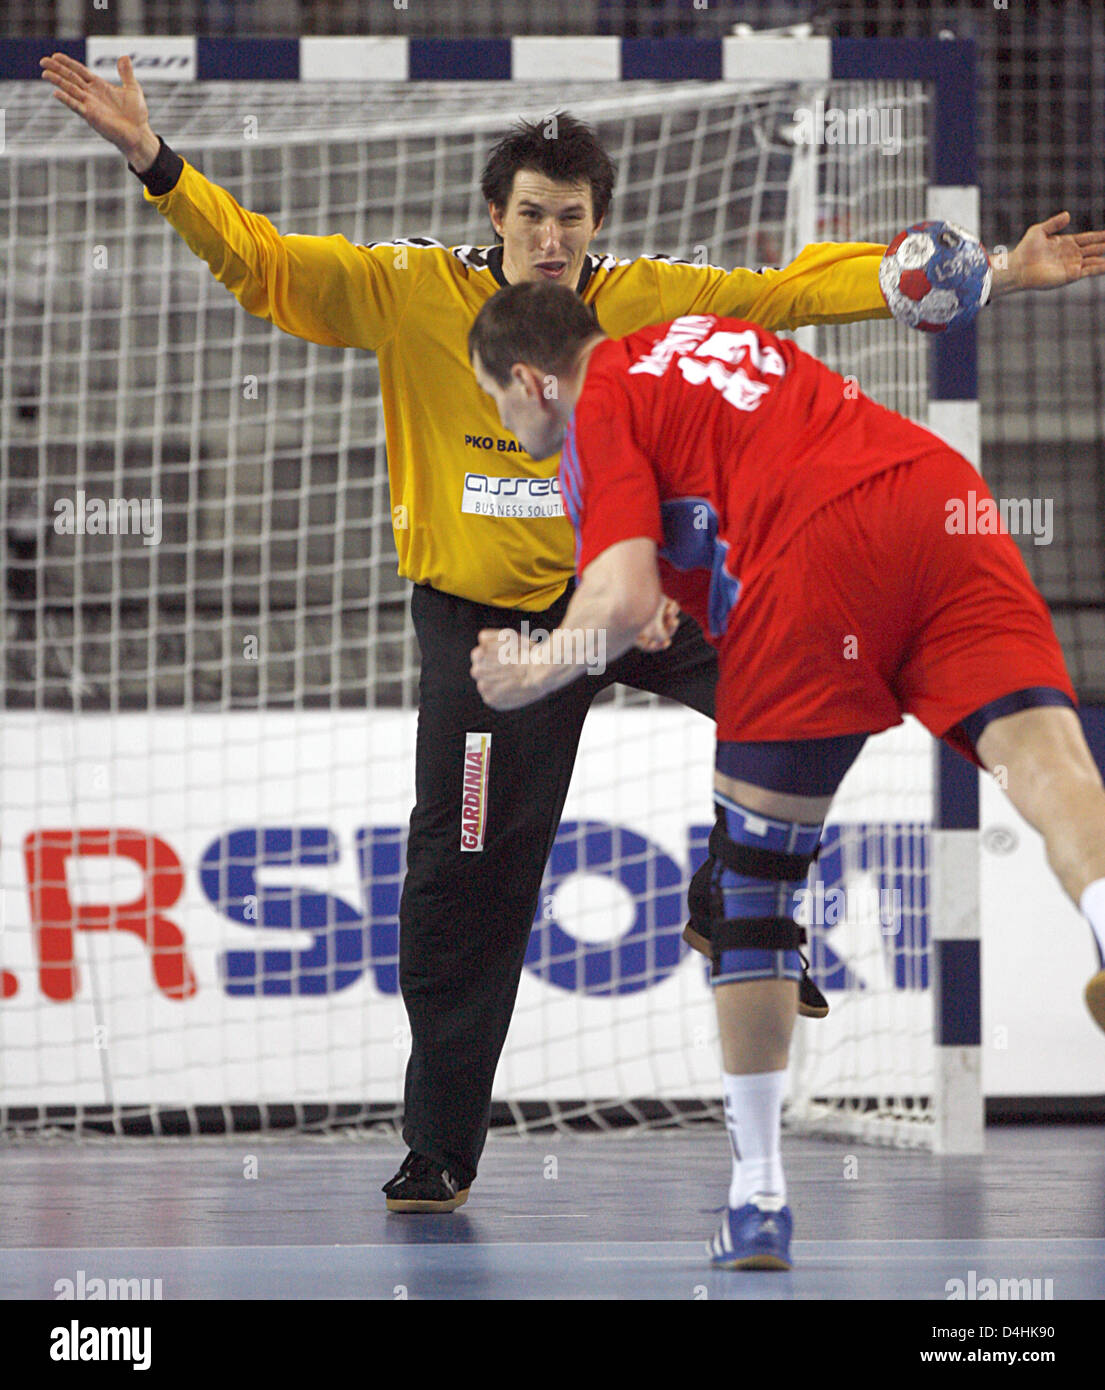 Russia?s Alexy Rastvortsev tries to throw the ball past Poland?s keeper Slawomir Szmal (L) during the Handball World Championships preliminary match of group C between Russia and Poland in Varazdin, Croatia, 18 January 2009. Poland won the match by 24-22. Photo: Jens Wolf Stock Photo